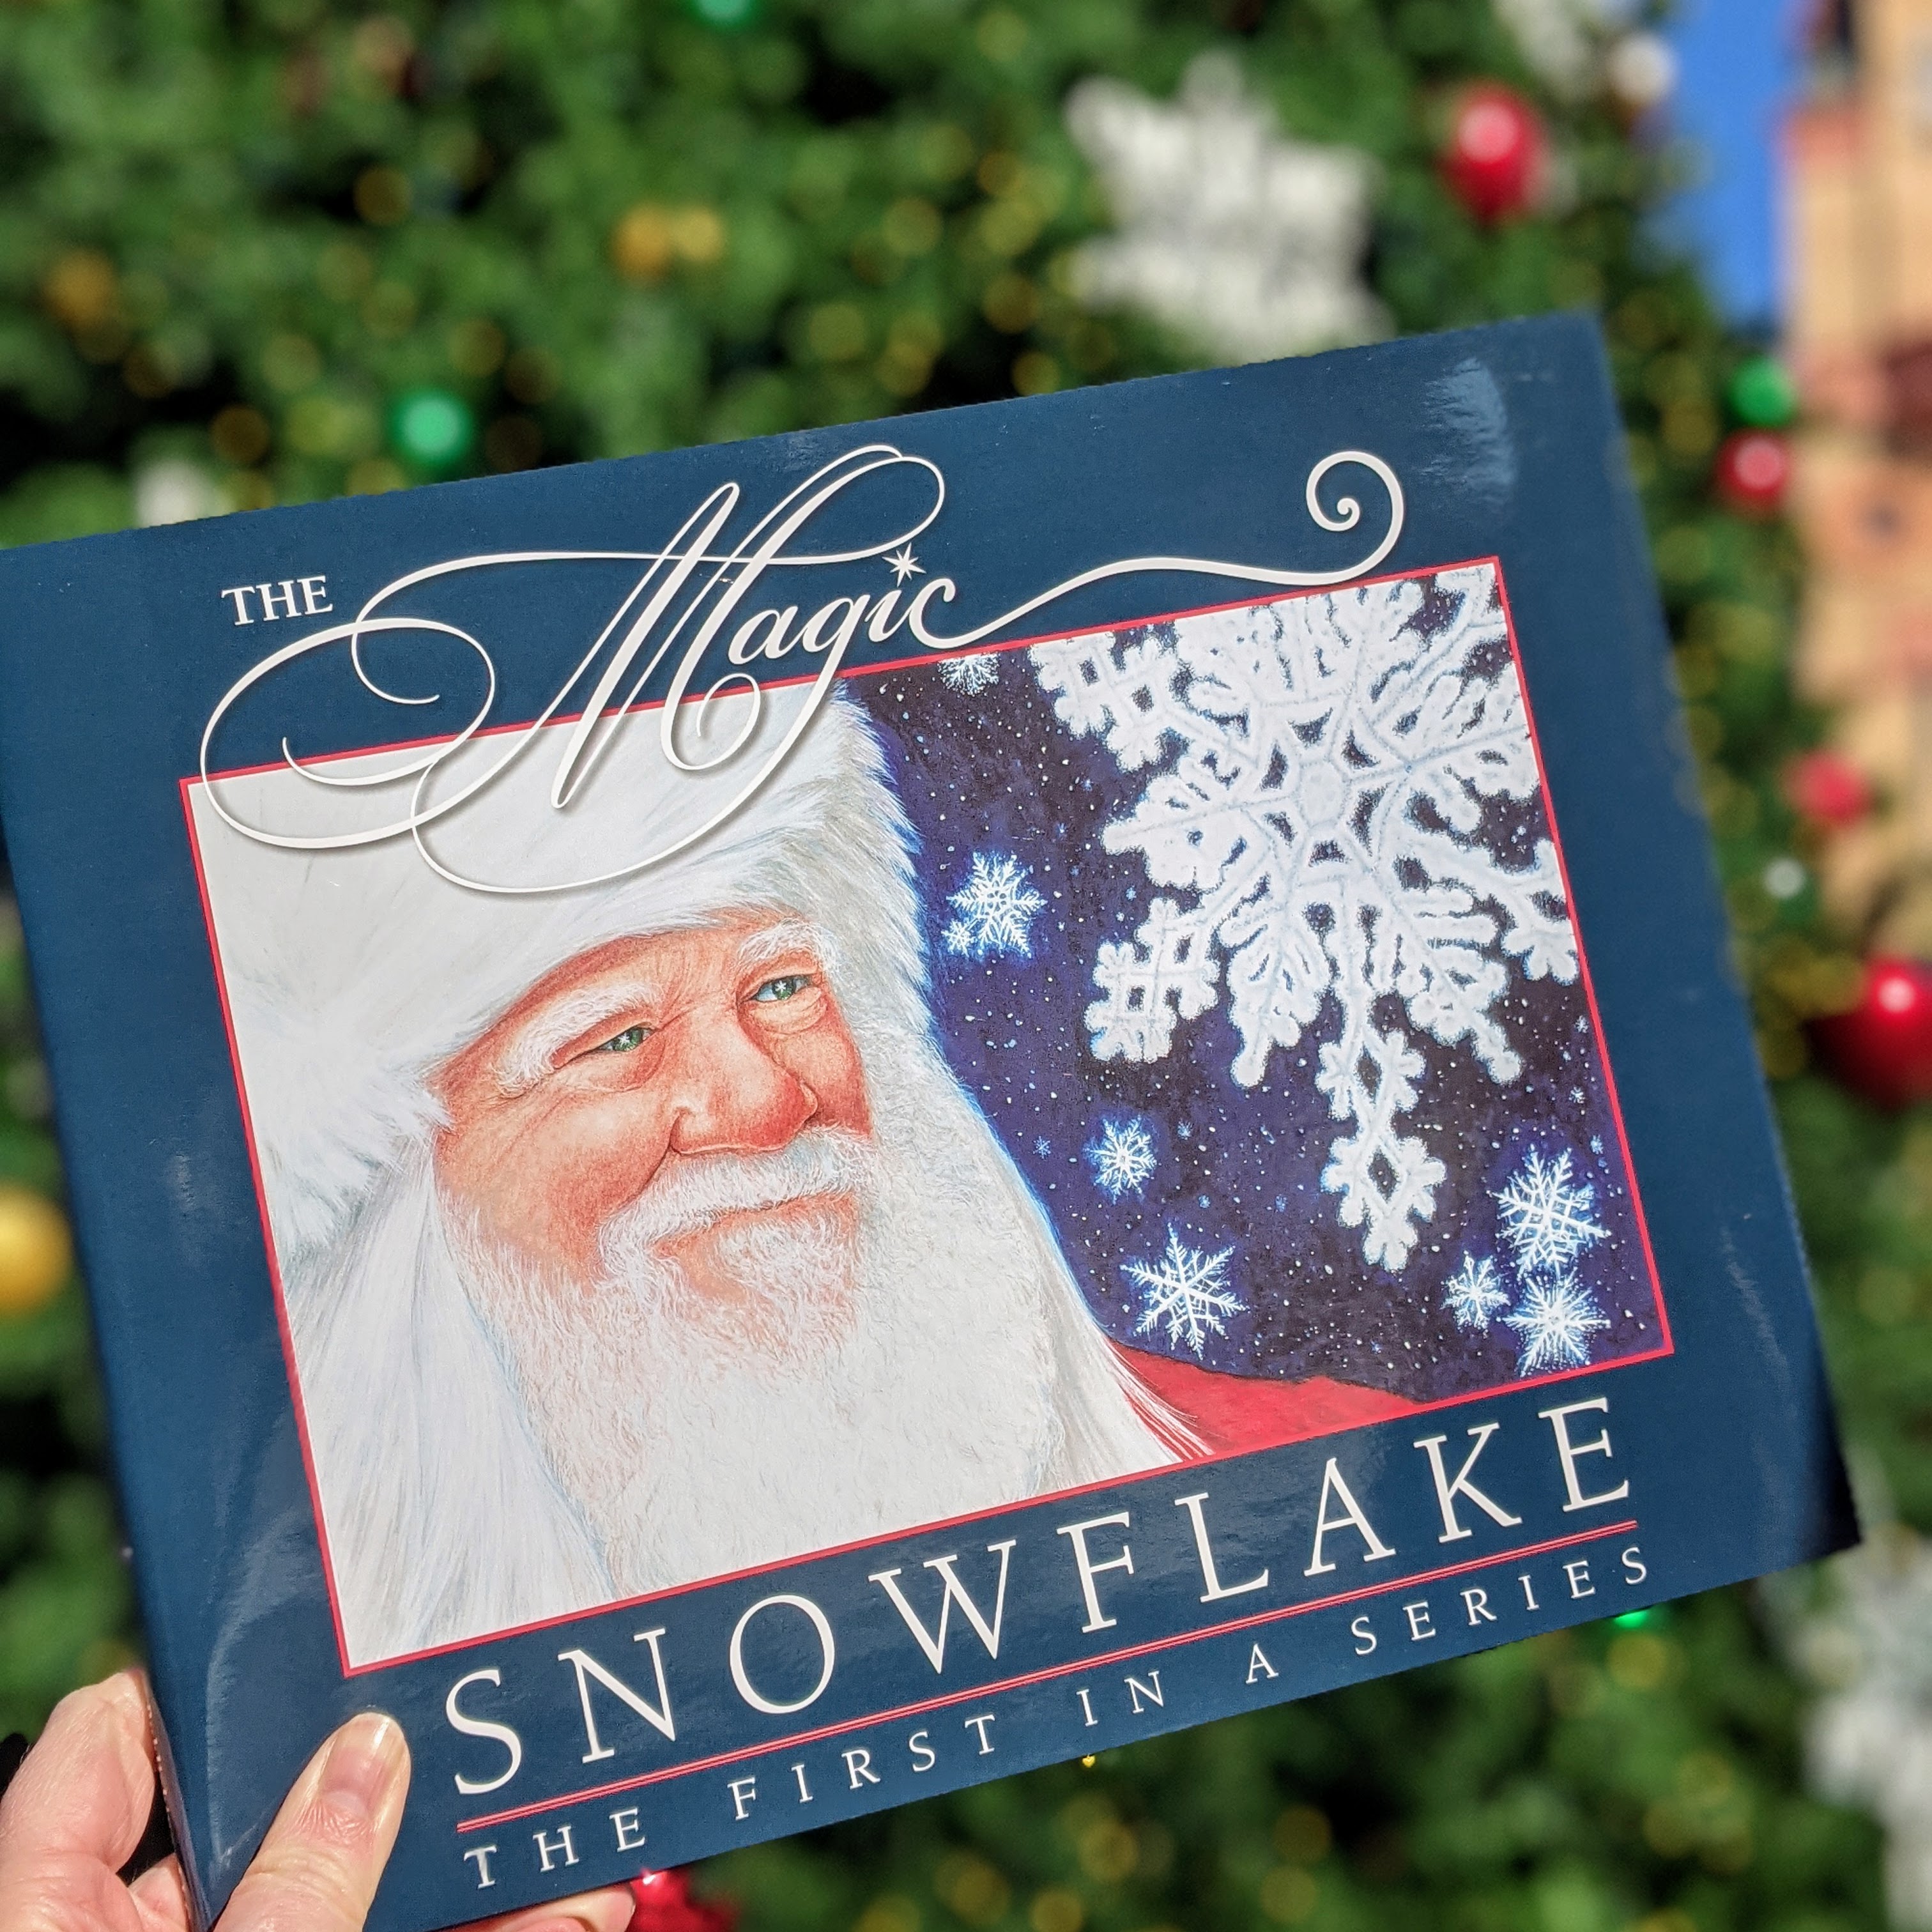 The Magic Snowflake book in front of a Christmas Tree